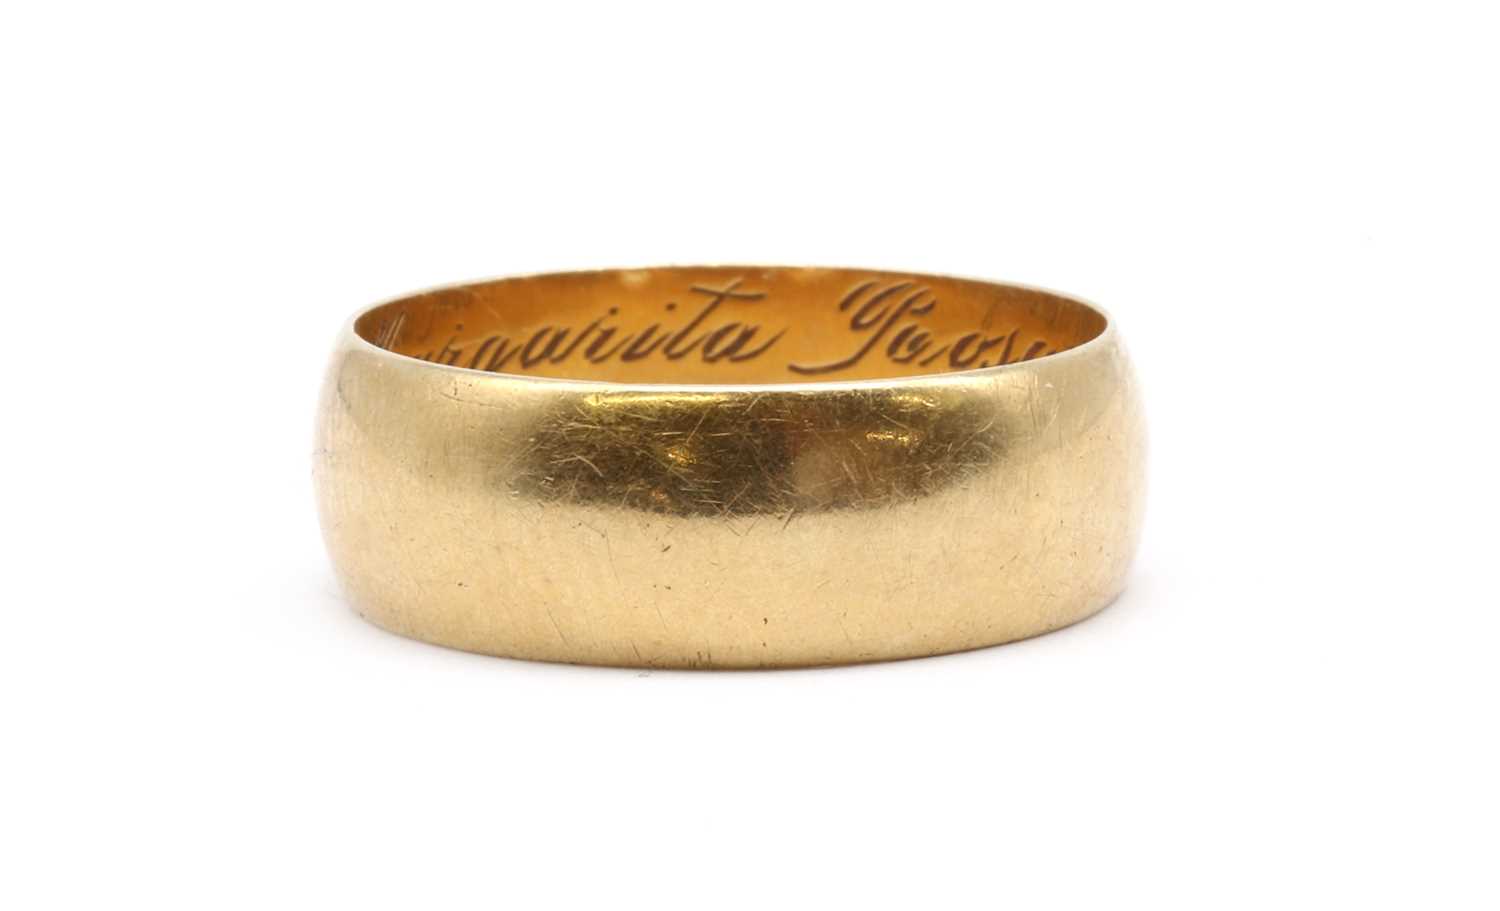 Lot 100 - A gold 'D' section wedding ring